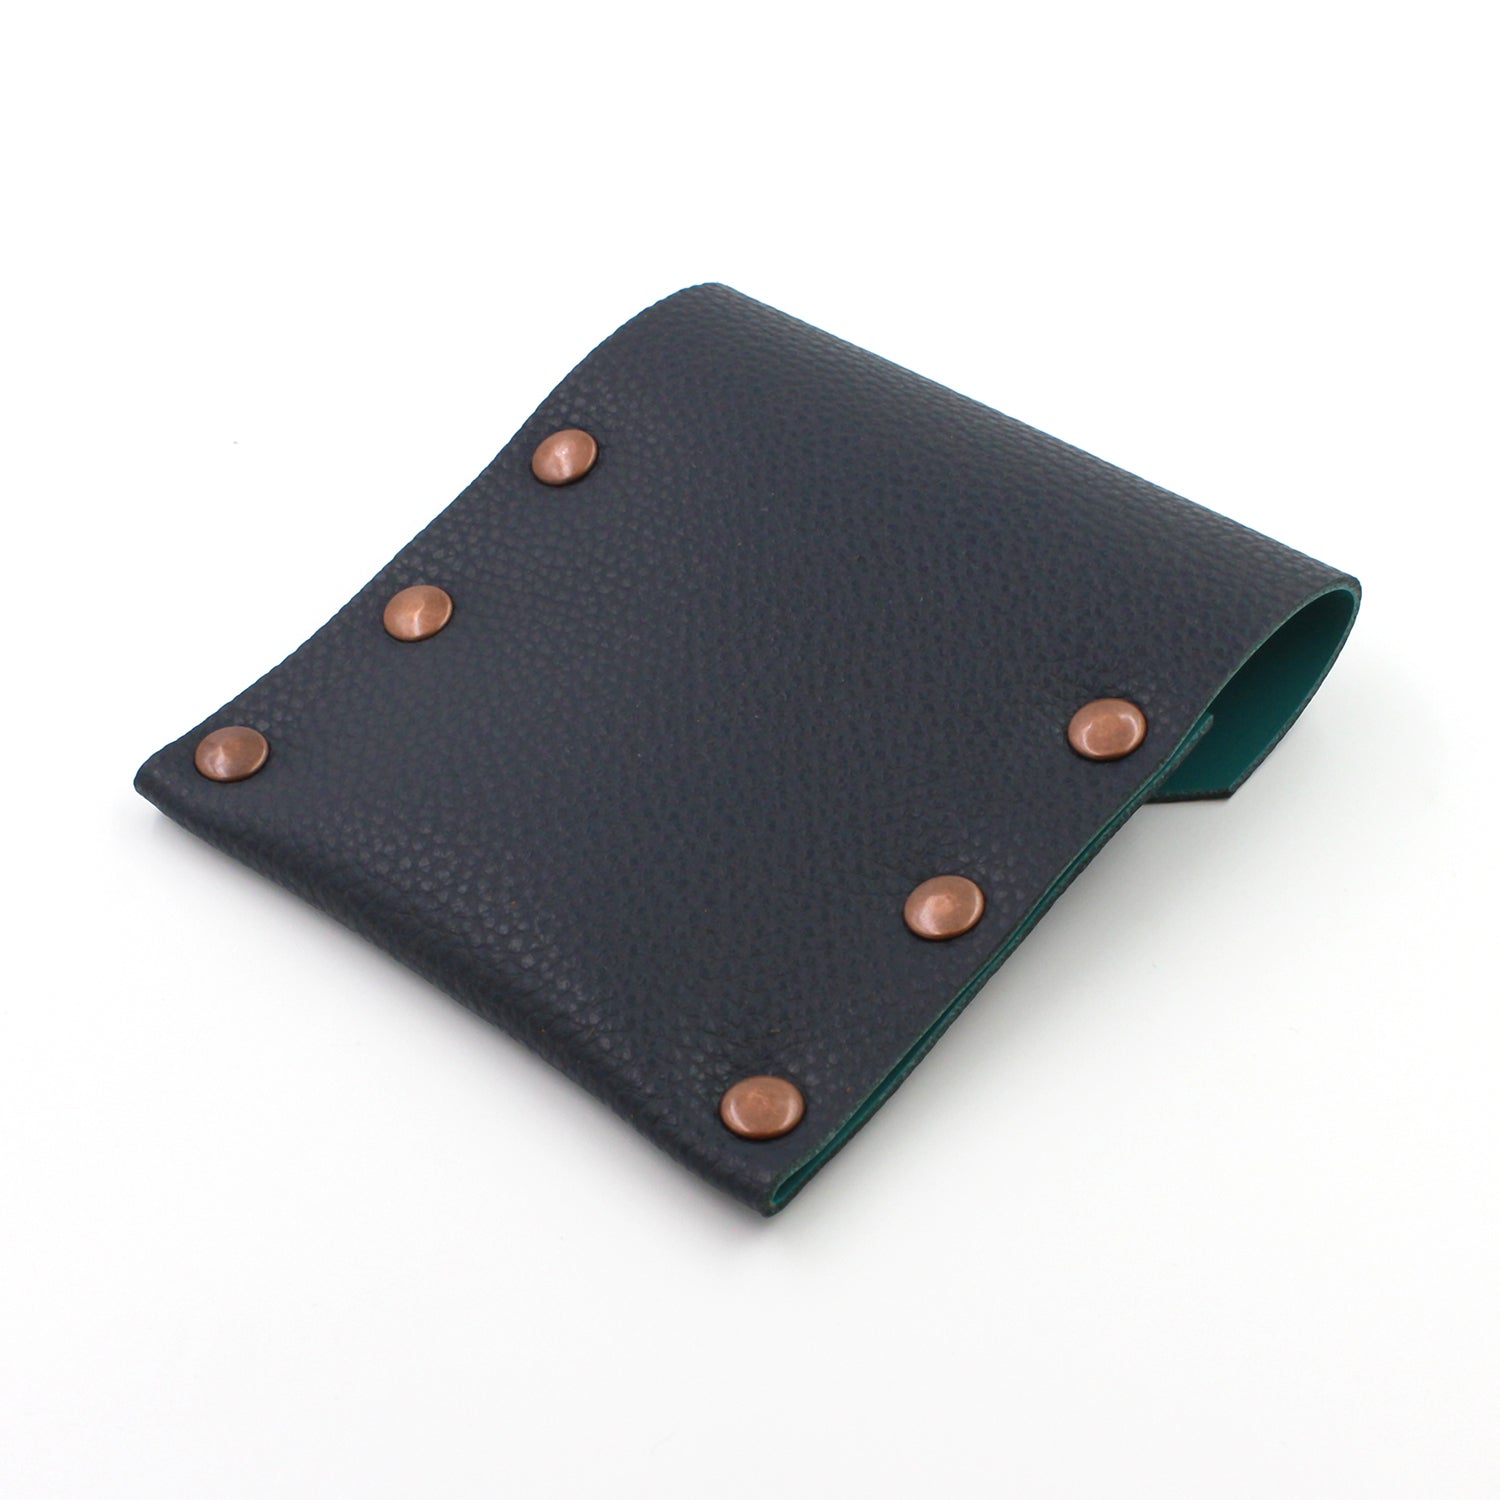 Navy & Turquoise Leather Business Card Case